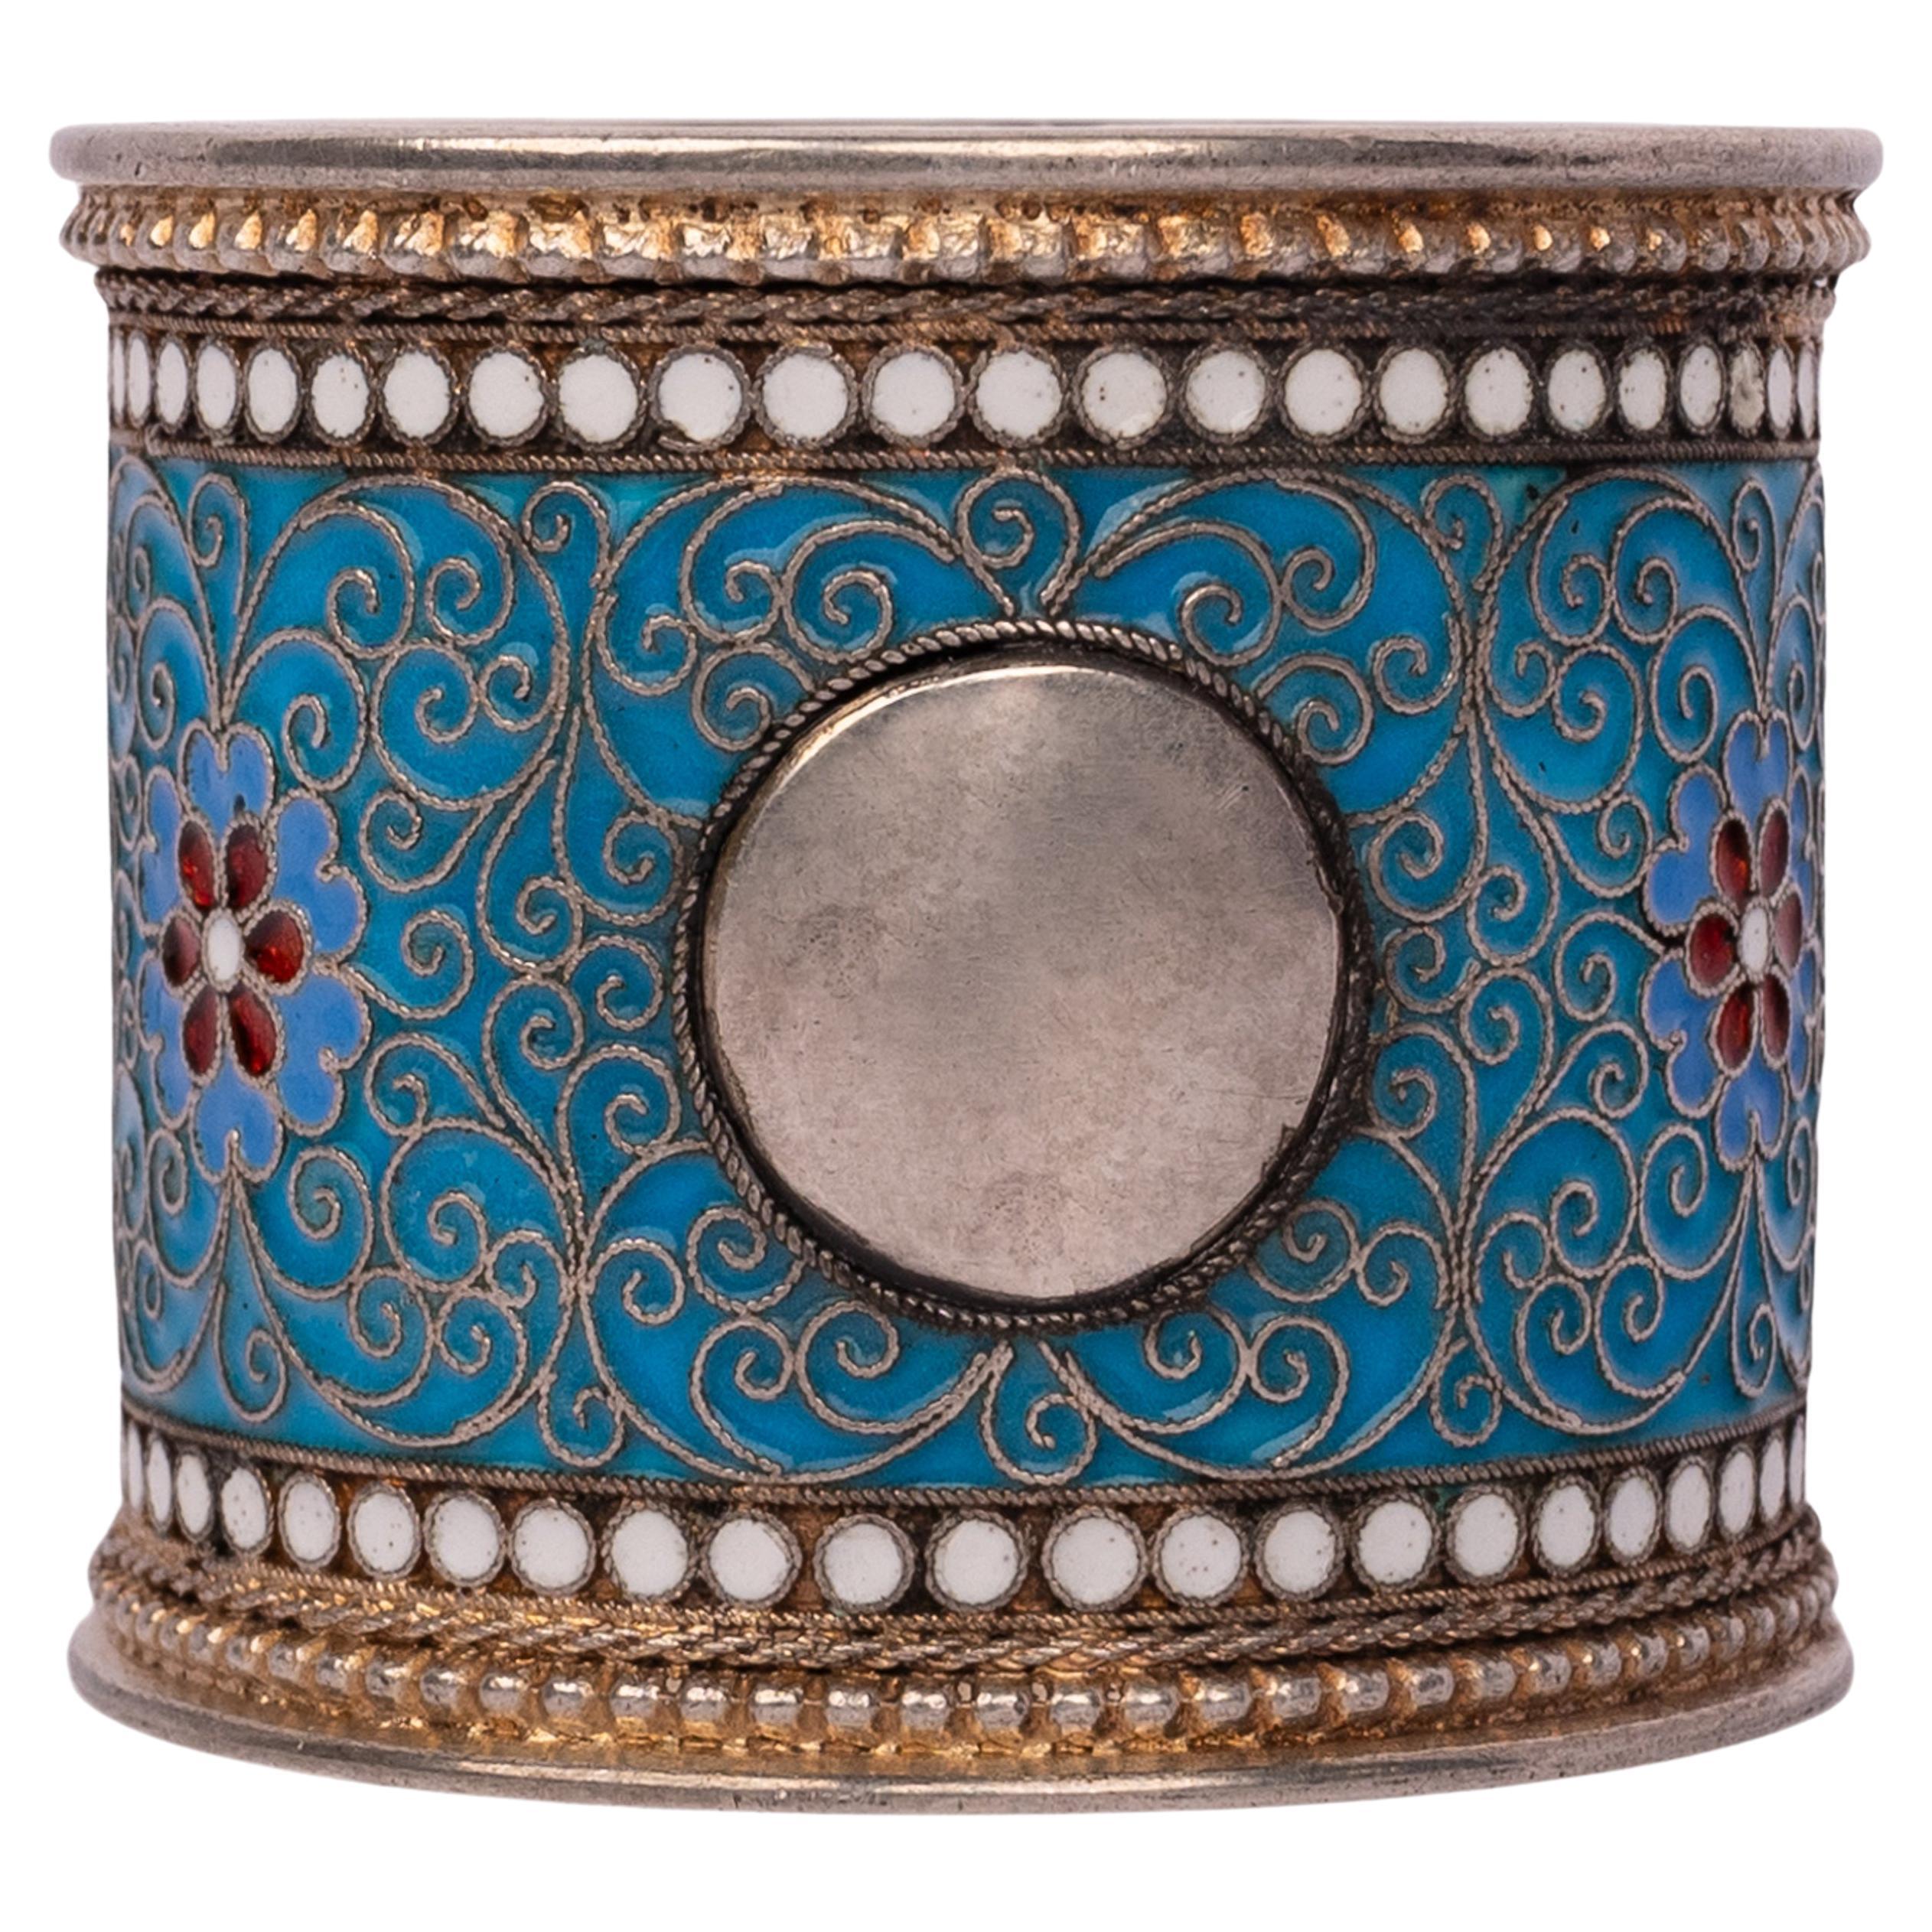 Antique Imperial Russian Silver Gold Cloisonne Enamel Napkin Ring Moscow 1896 For Sale